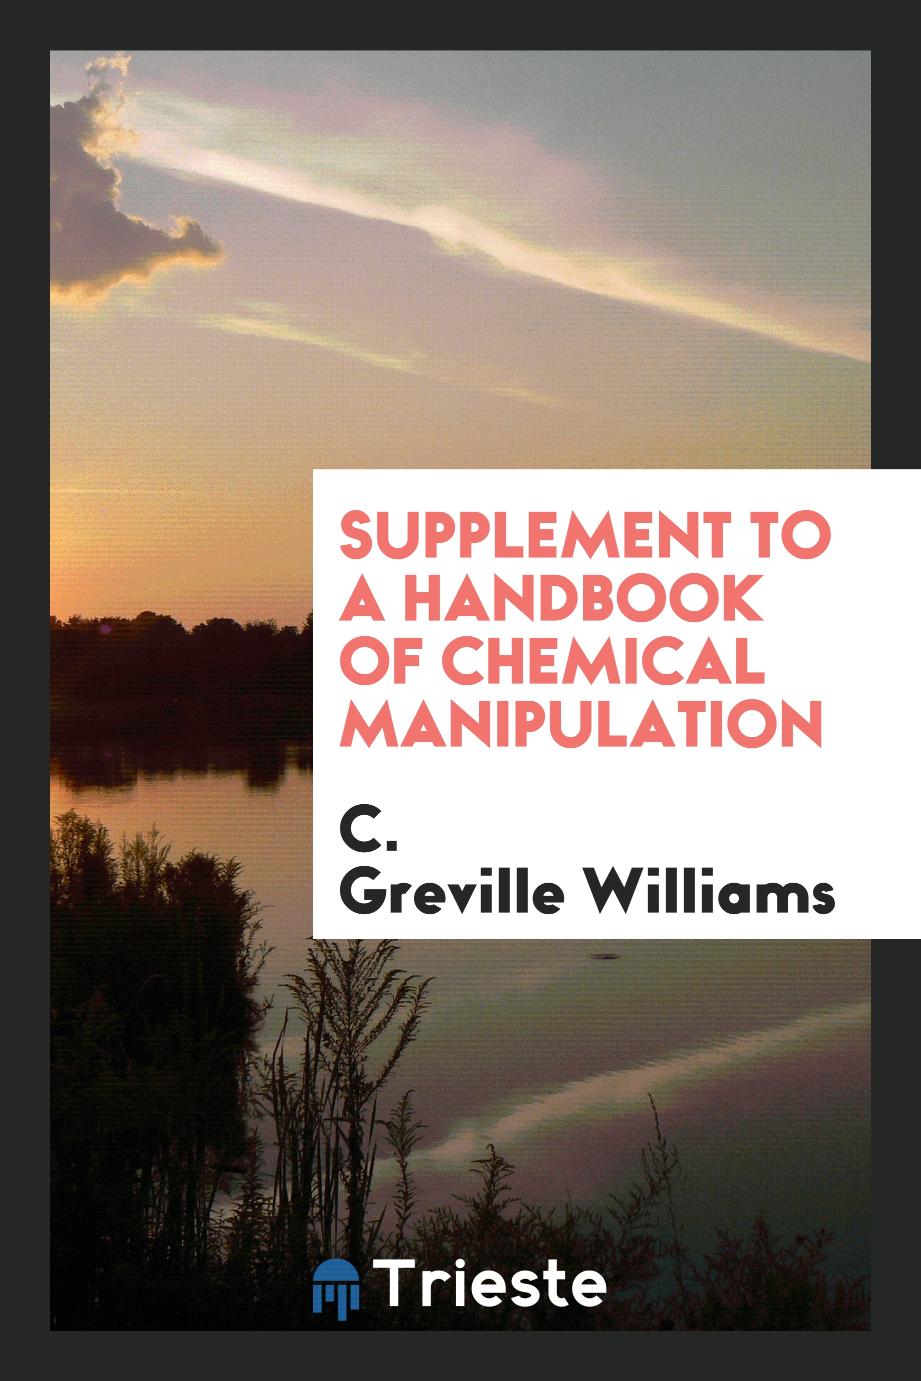 Supplement to a Handbook of Chemical Manipulation